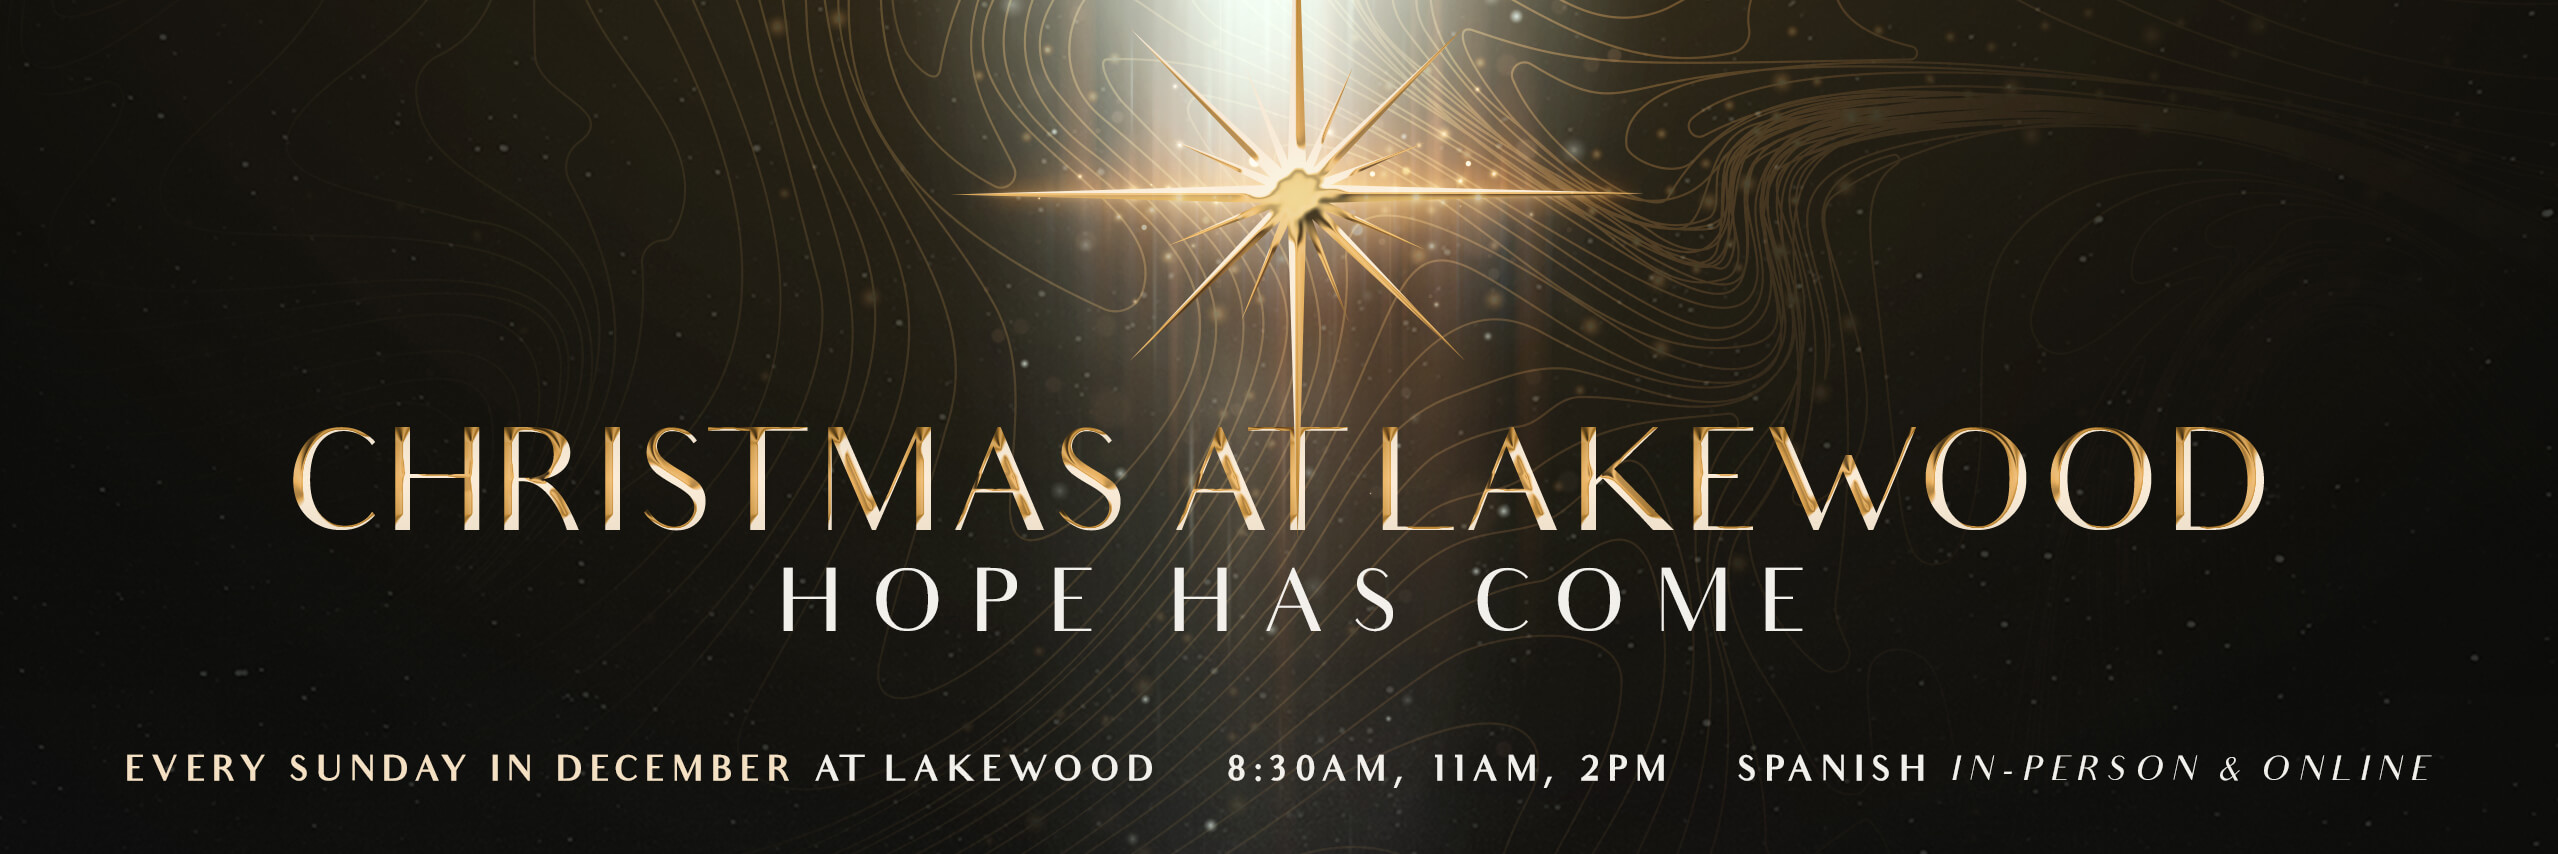 CHRISTMAS AT LAKEWOOD | Hope has Come | Every Sunday in December at Lakewood - 8:30am, 11am, 2pm (Spanish) - In-Person and Online